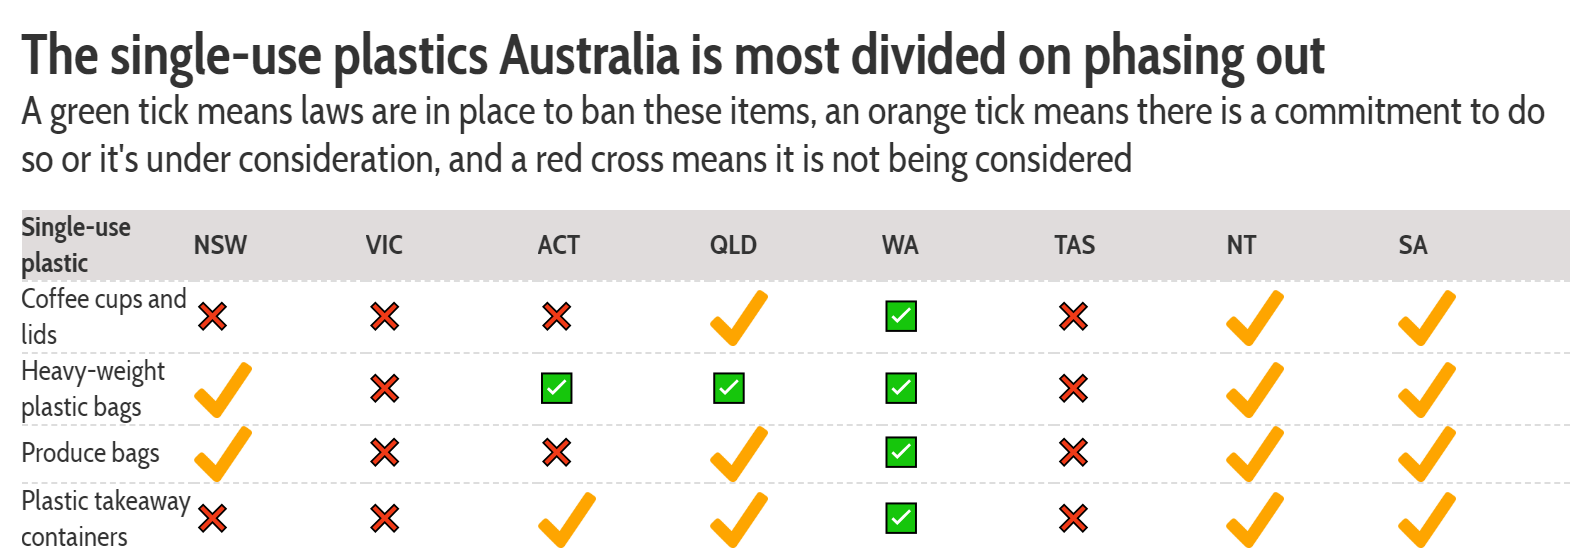 A table shows the single-use plastics state and territory governments are divided on phasing out.